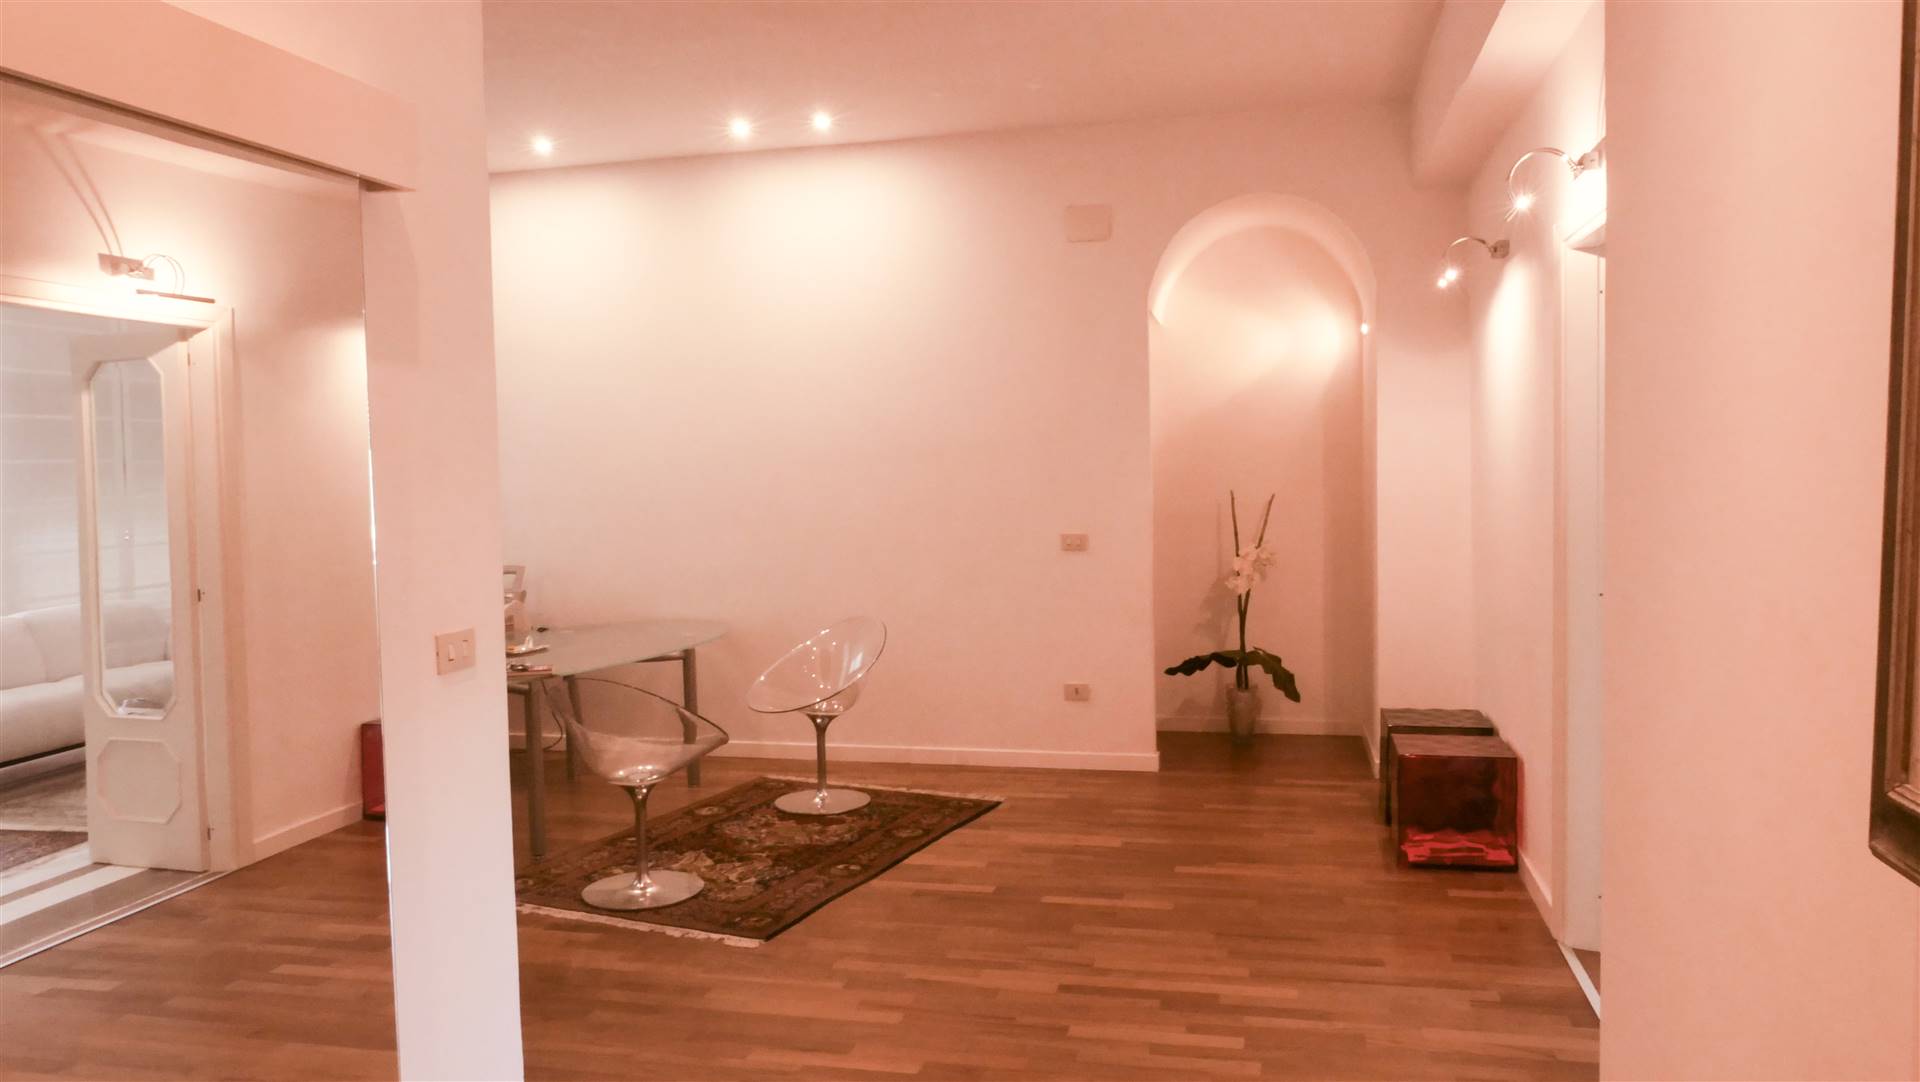 VIALE DELLA REPUBBLICA, COSENZA, Apartment for sale, Restored, Heating Individual heating system, Energetic class: F, placed at 2° on 4, composed by: 